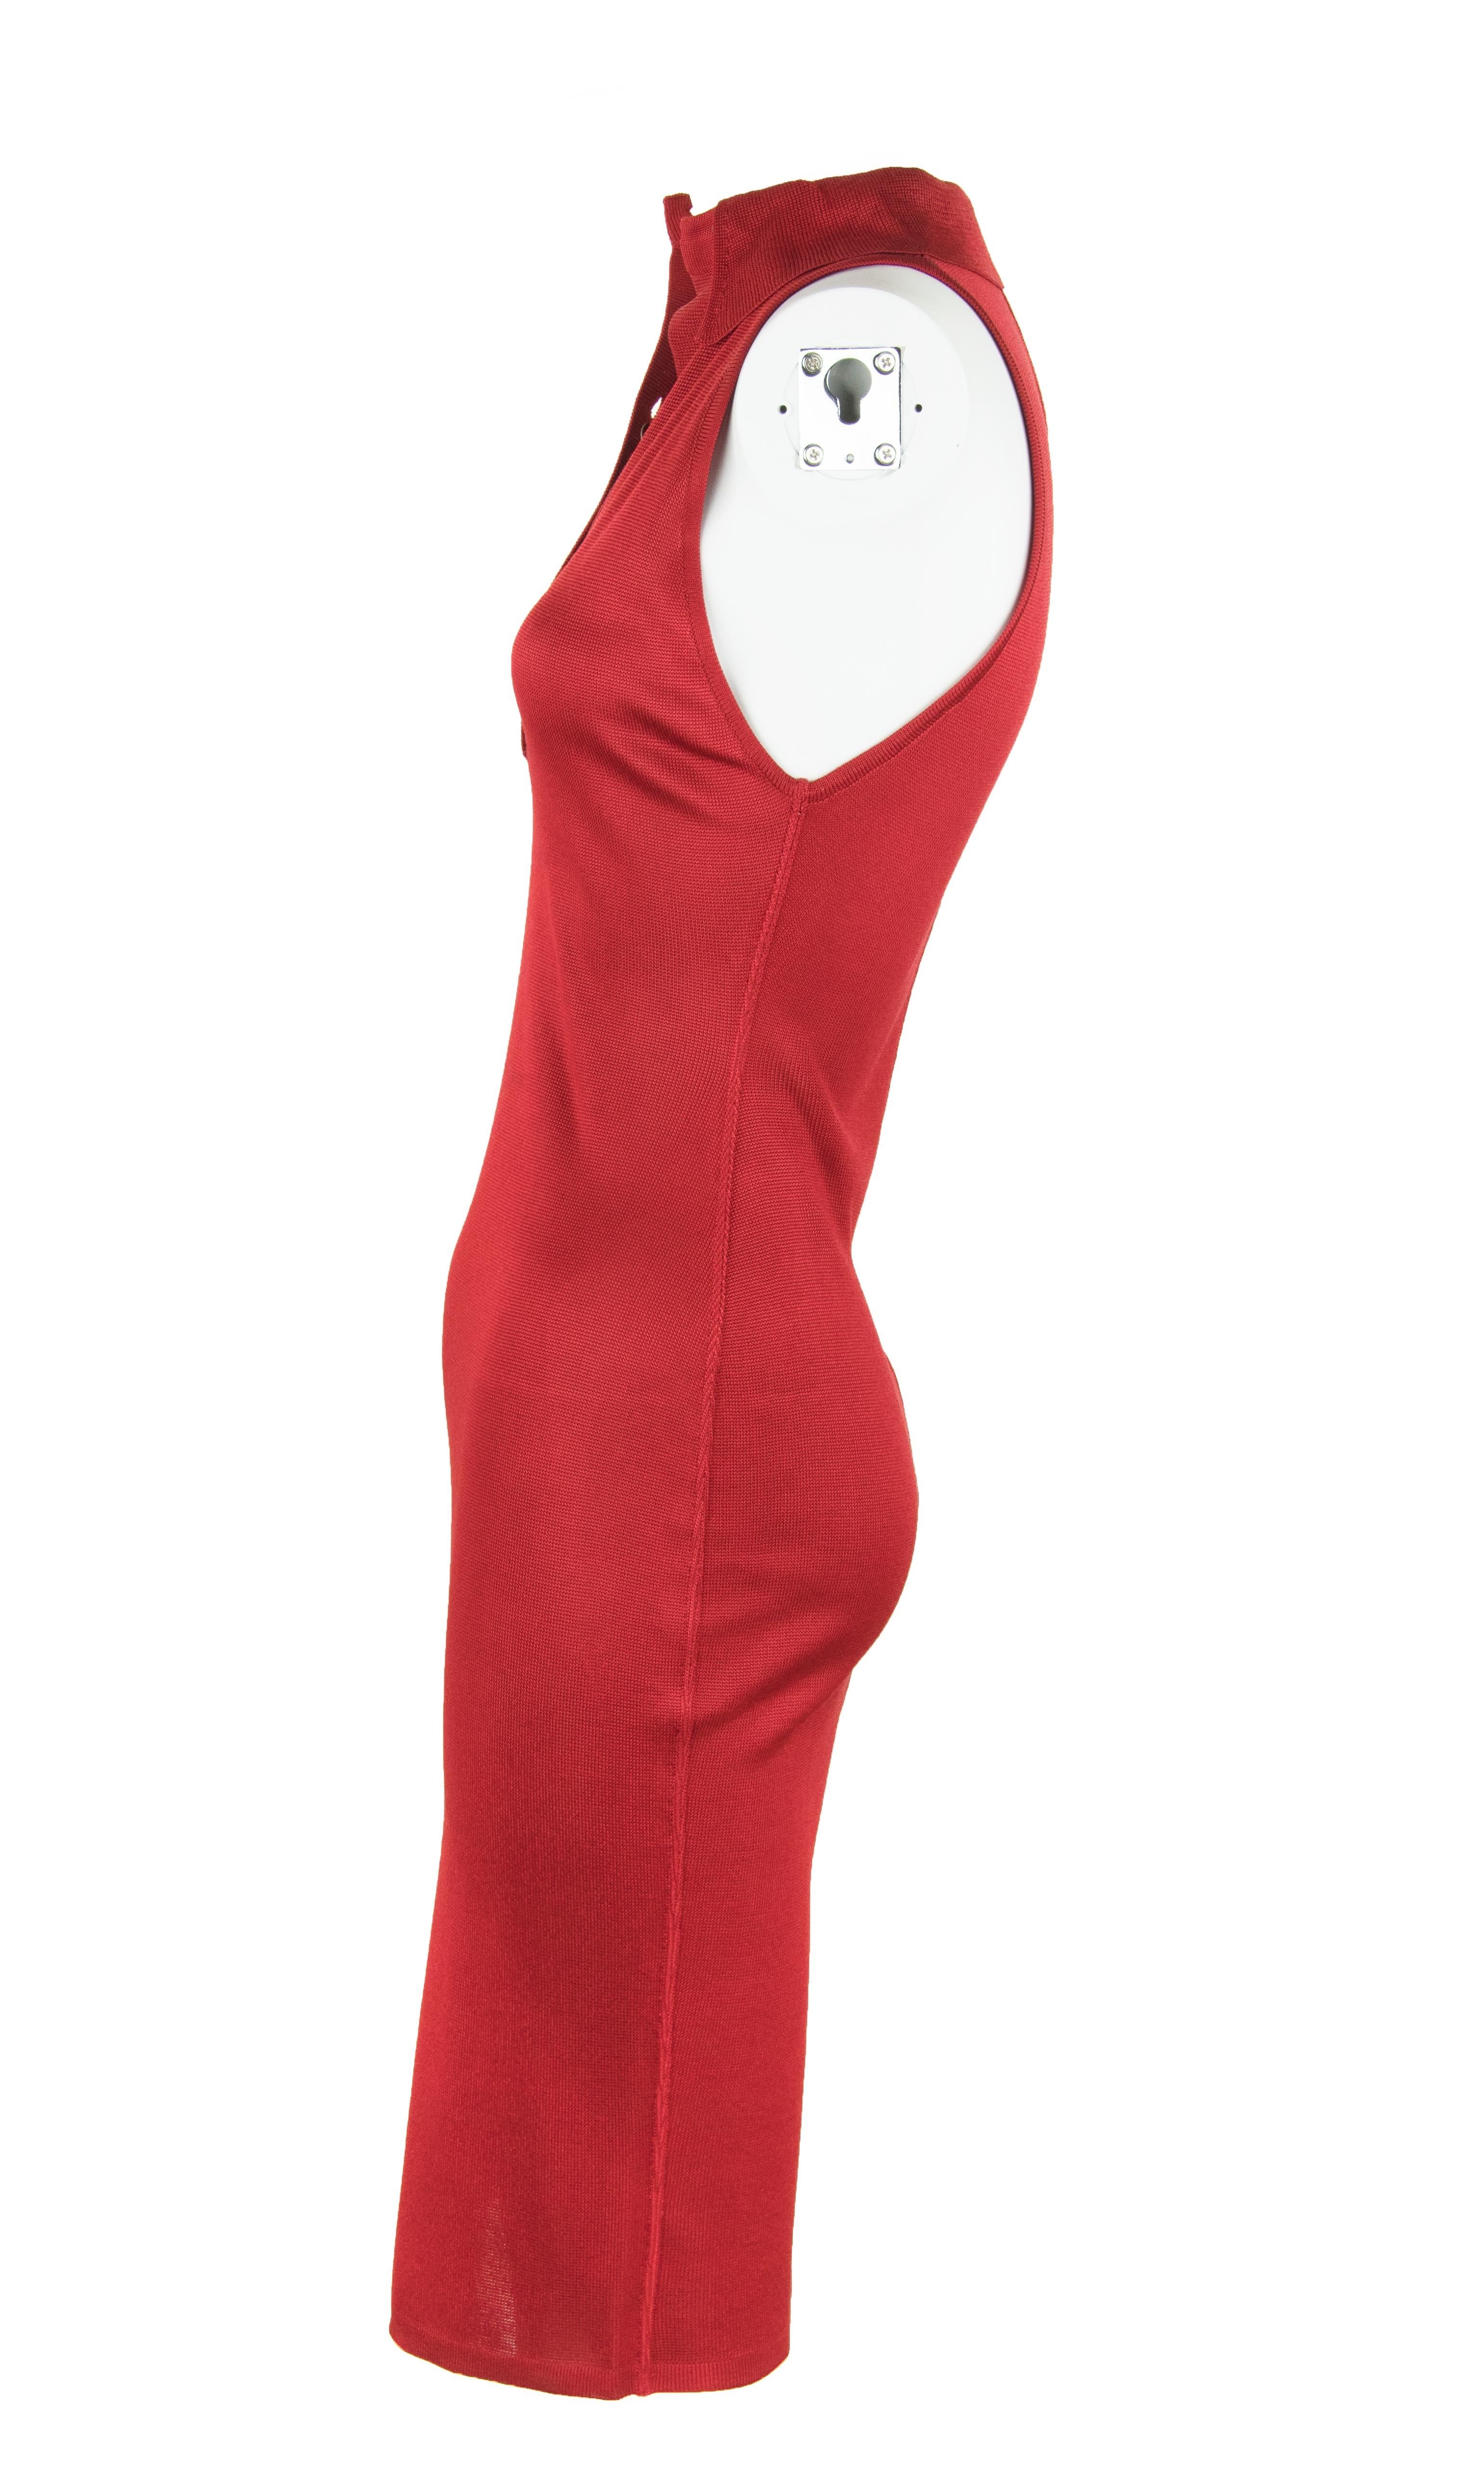 Sleeveless, vintage Alaia red collared dress.  Sexy and classic at the same time.  Easy dress to throw on for day or night.

Size: Size not marked but approximate XS

Condition: Excellent vintage condition.

Made in Italy